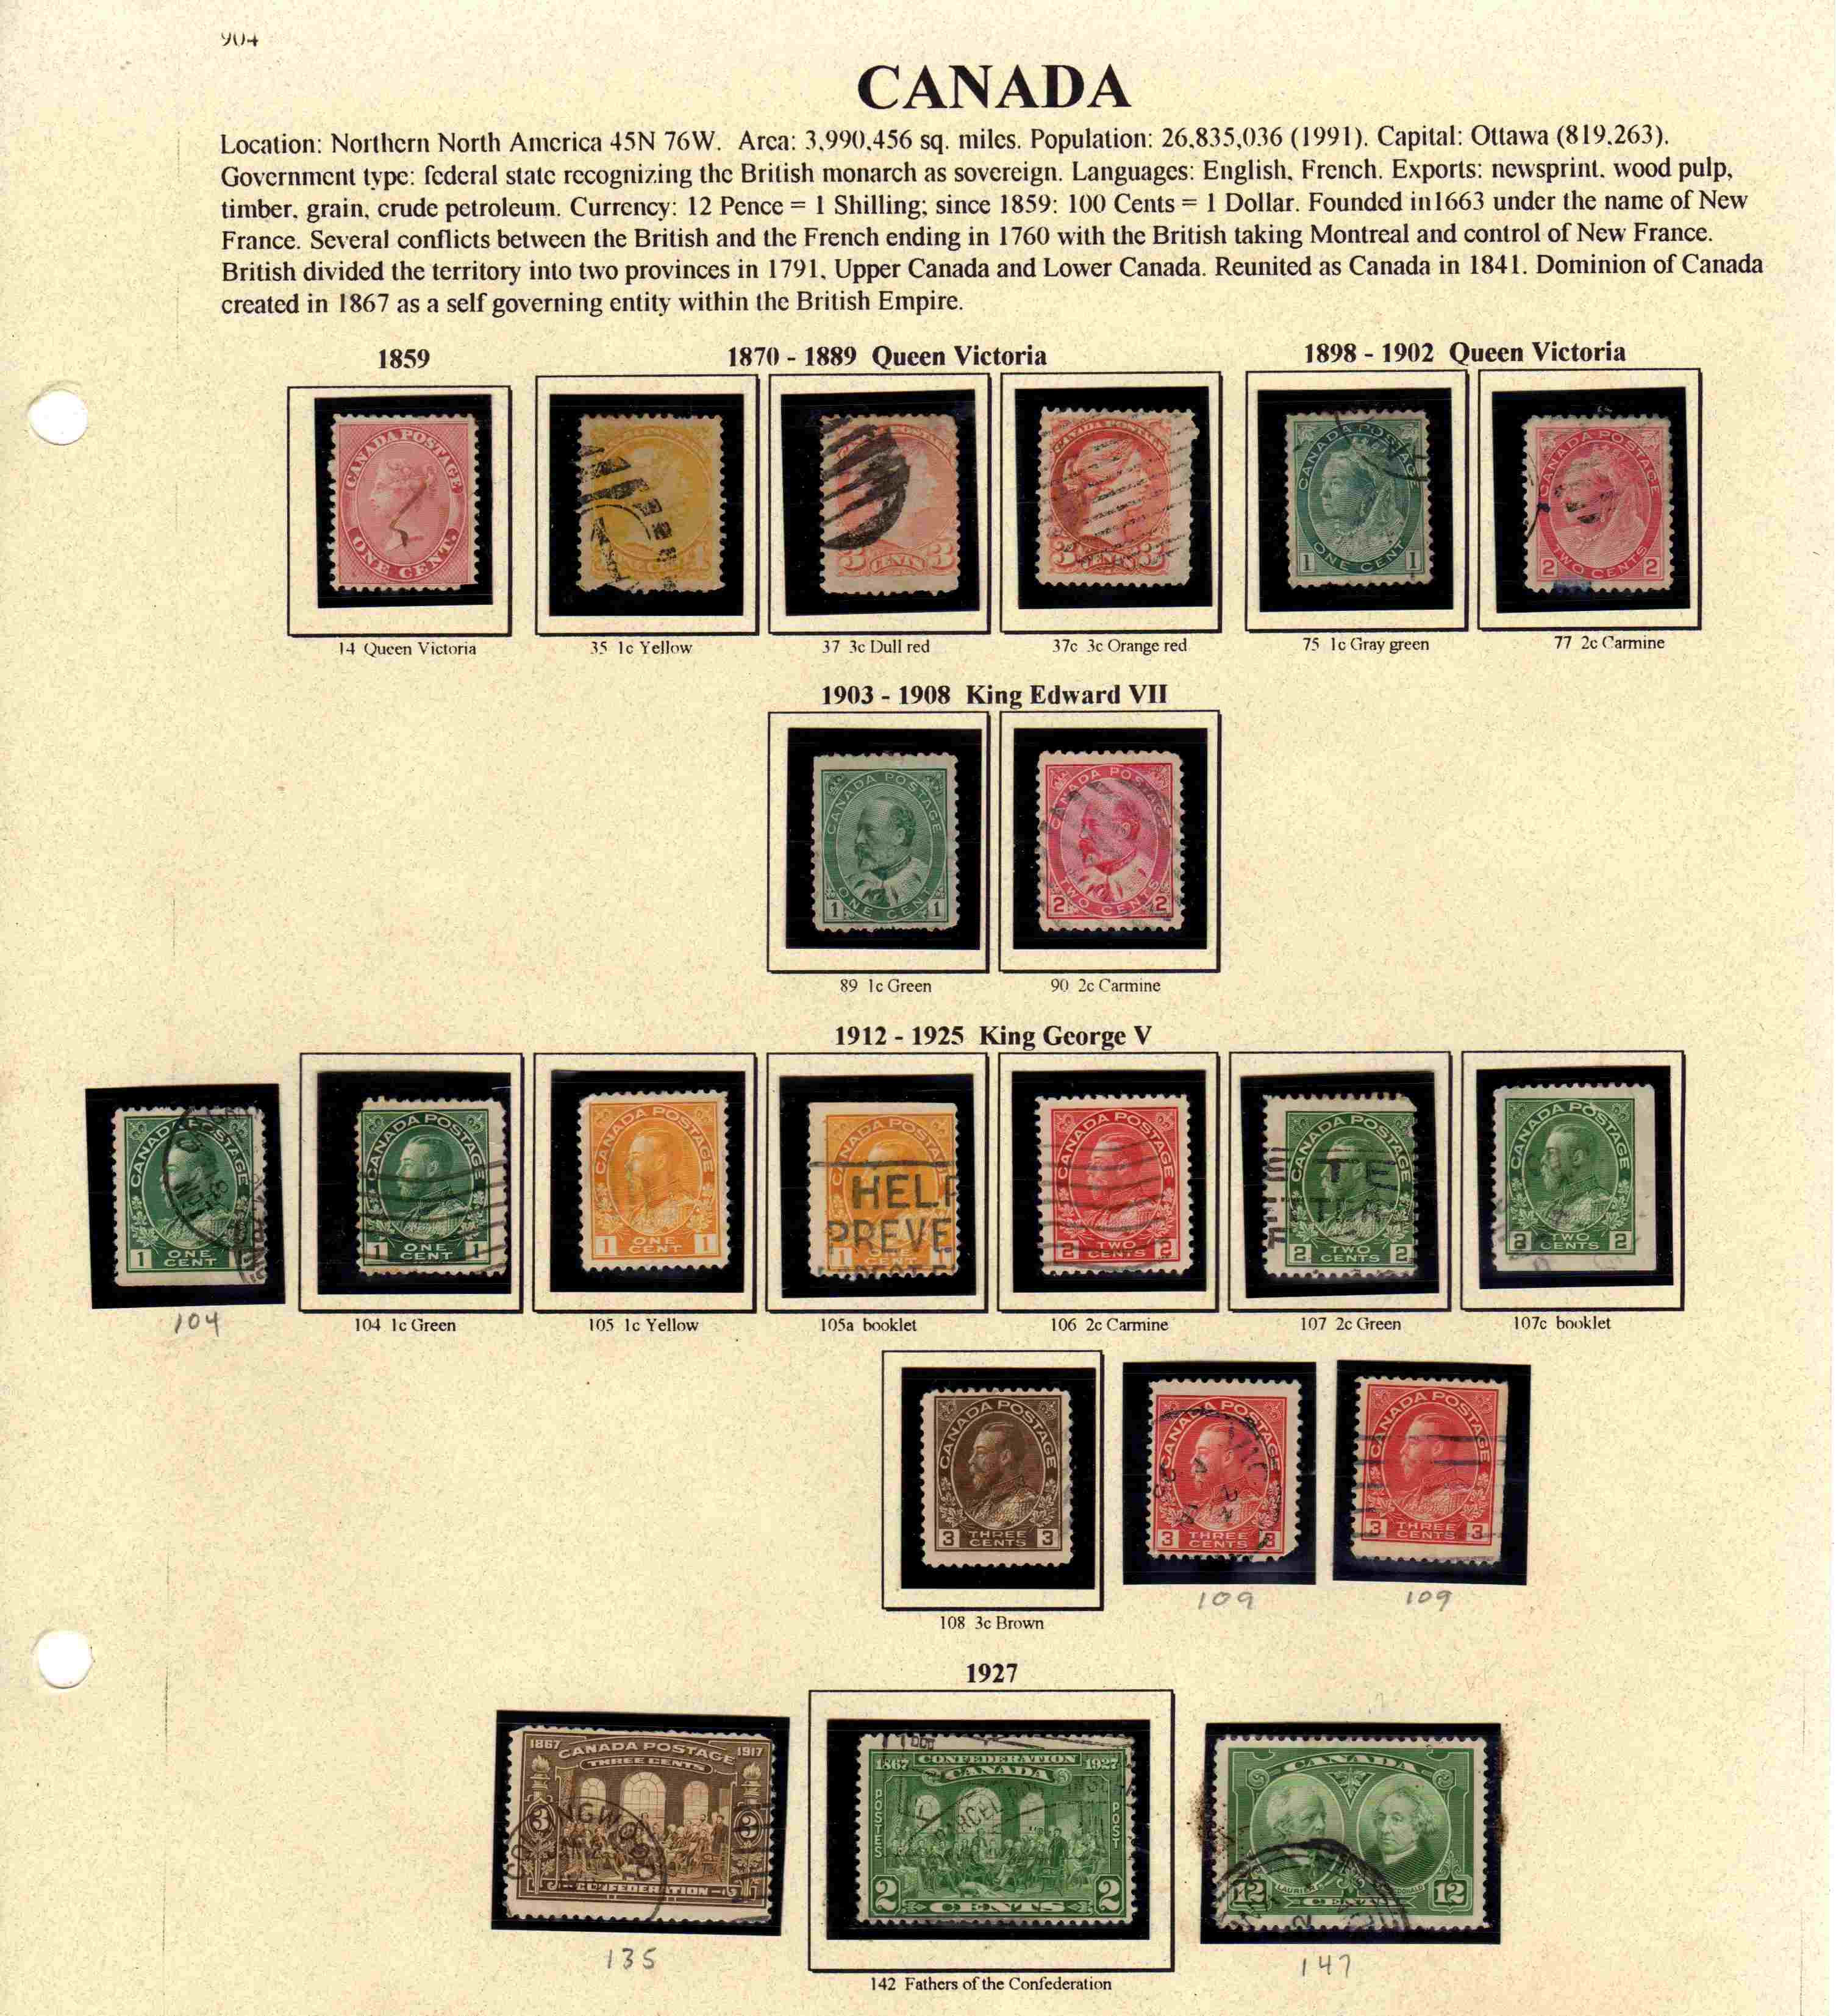 Stamps/canadap1.jpg